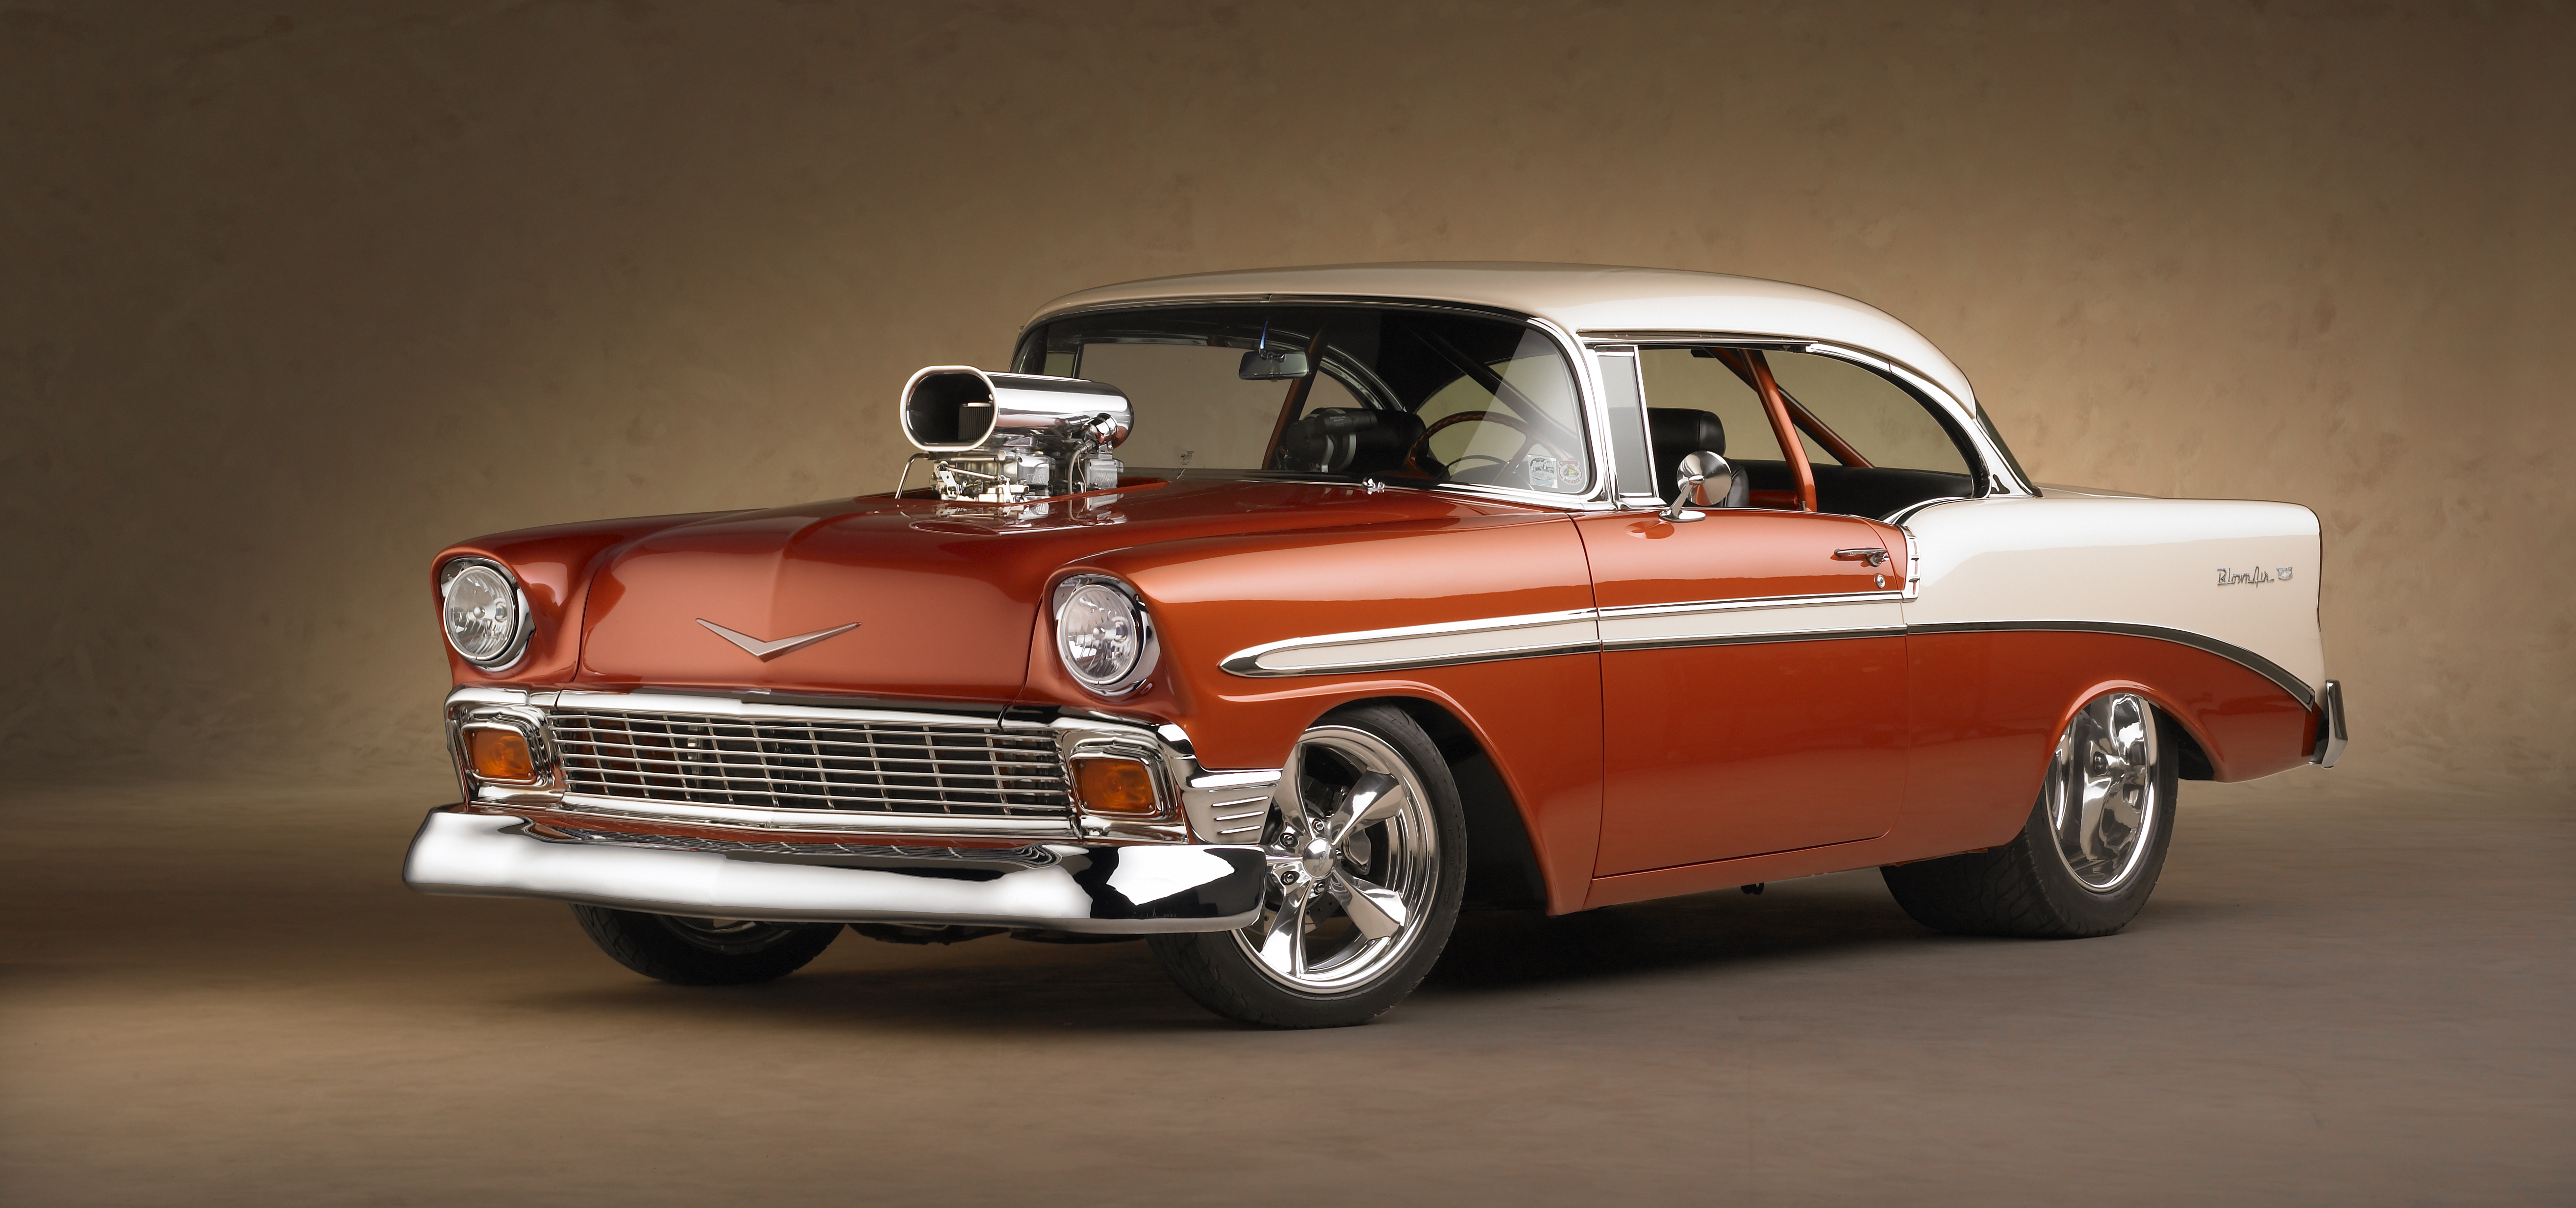 1956 Chevrolet Bel Air Backgrounds on Wallpapers Vista